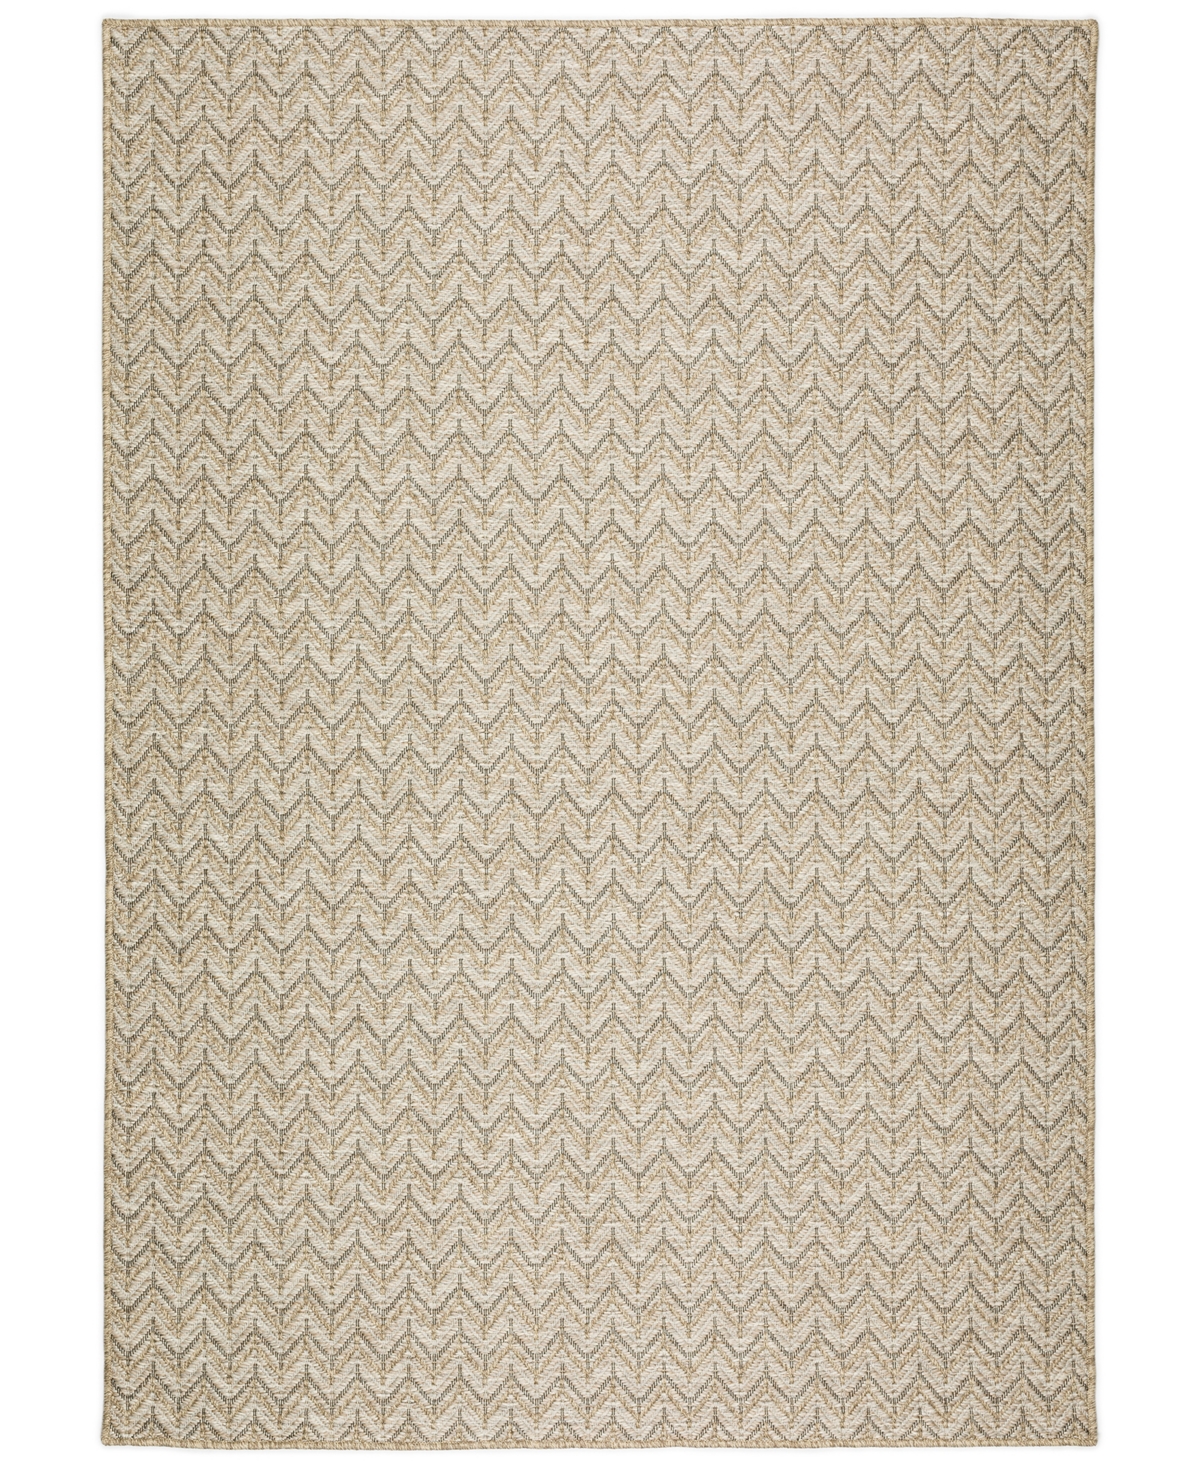 D Style Nusa Outdoor Nsa1 10' X 13' Area Rug In Beige